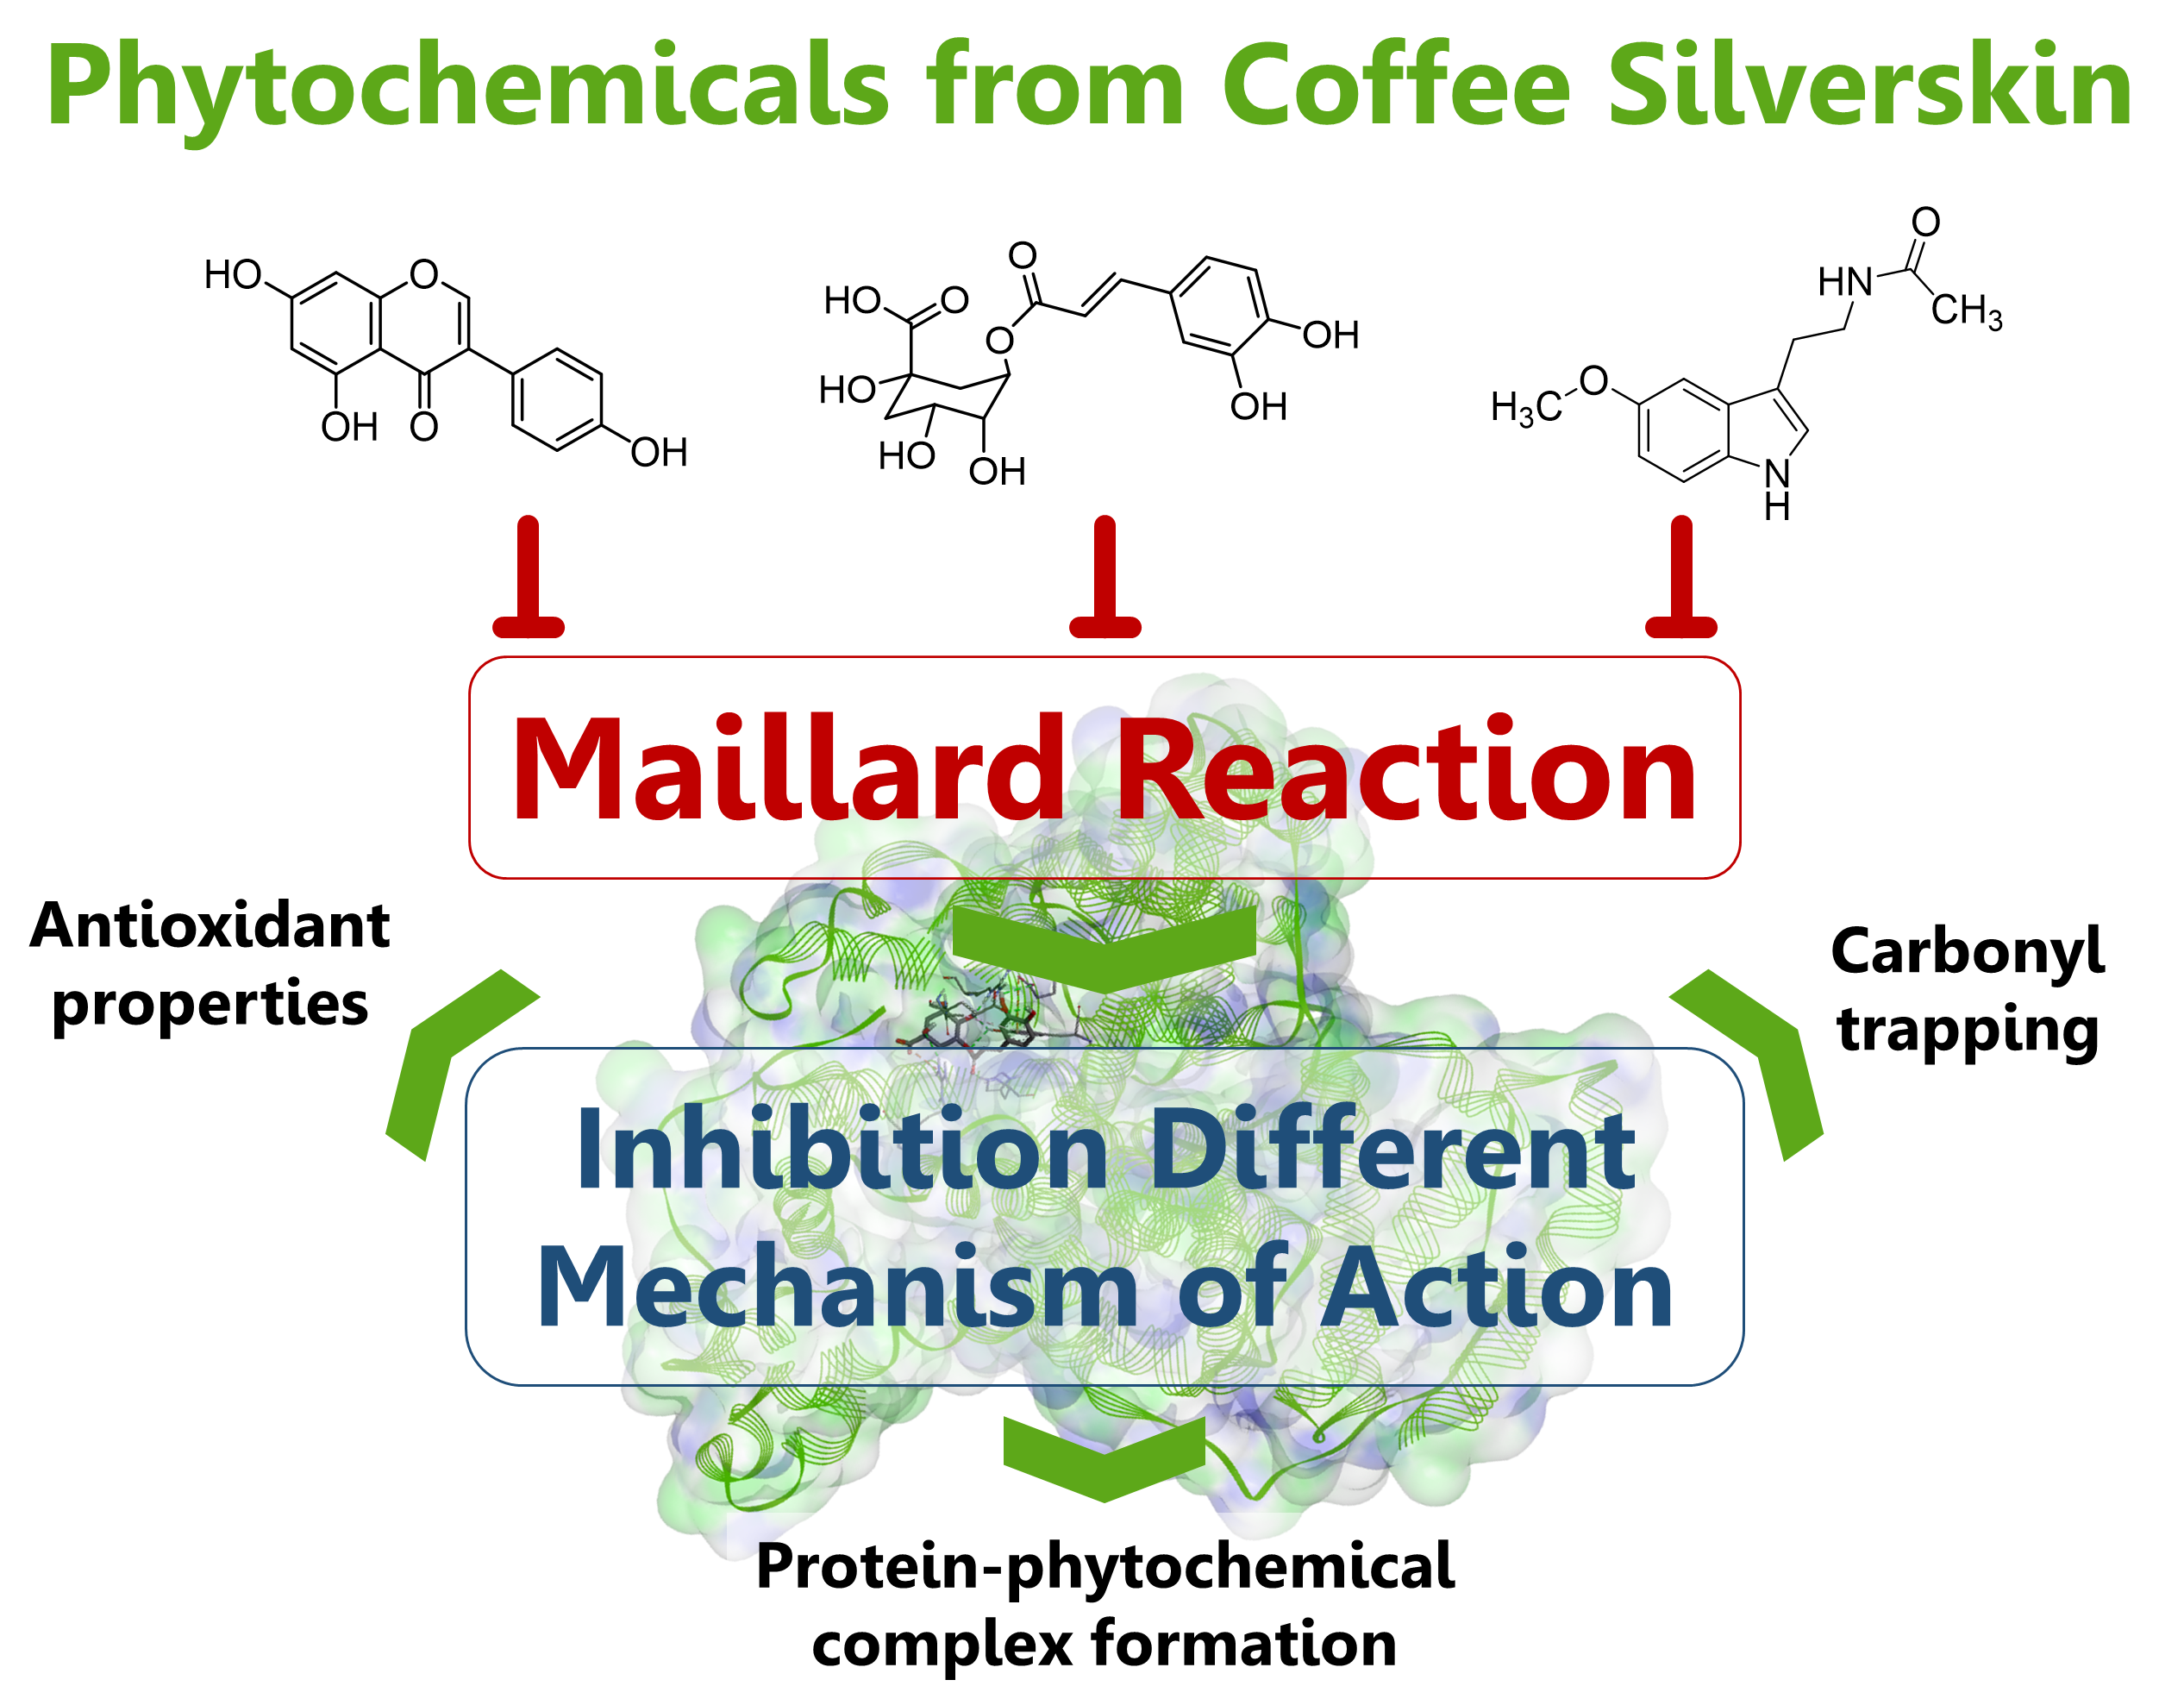 Inhibition of the Maillard Reaction by Phytochemicals Composing an Aqueous Coffee Silverskin Extract via a Mixed Mechanism of Action